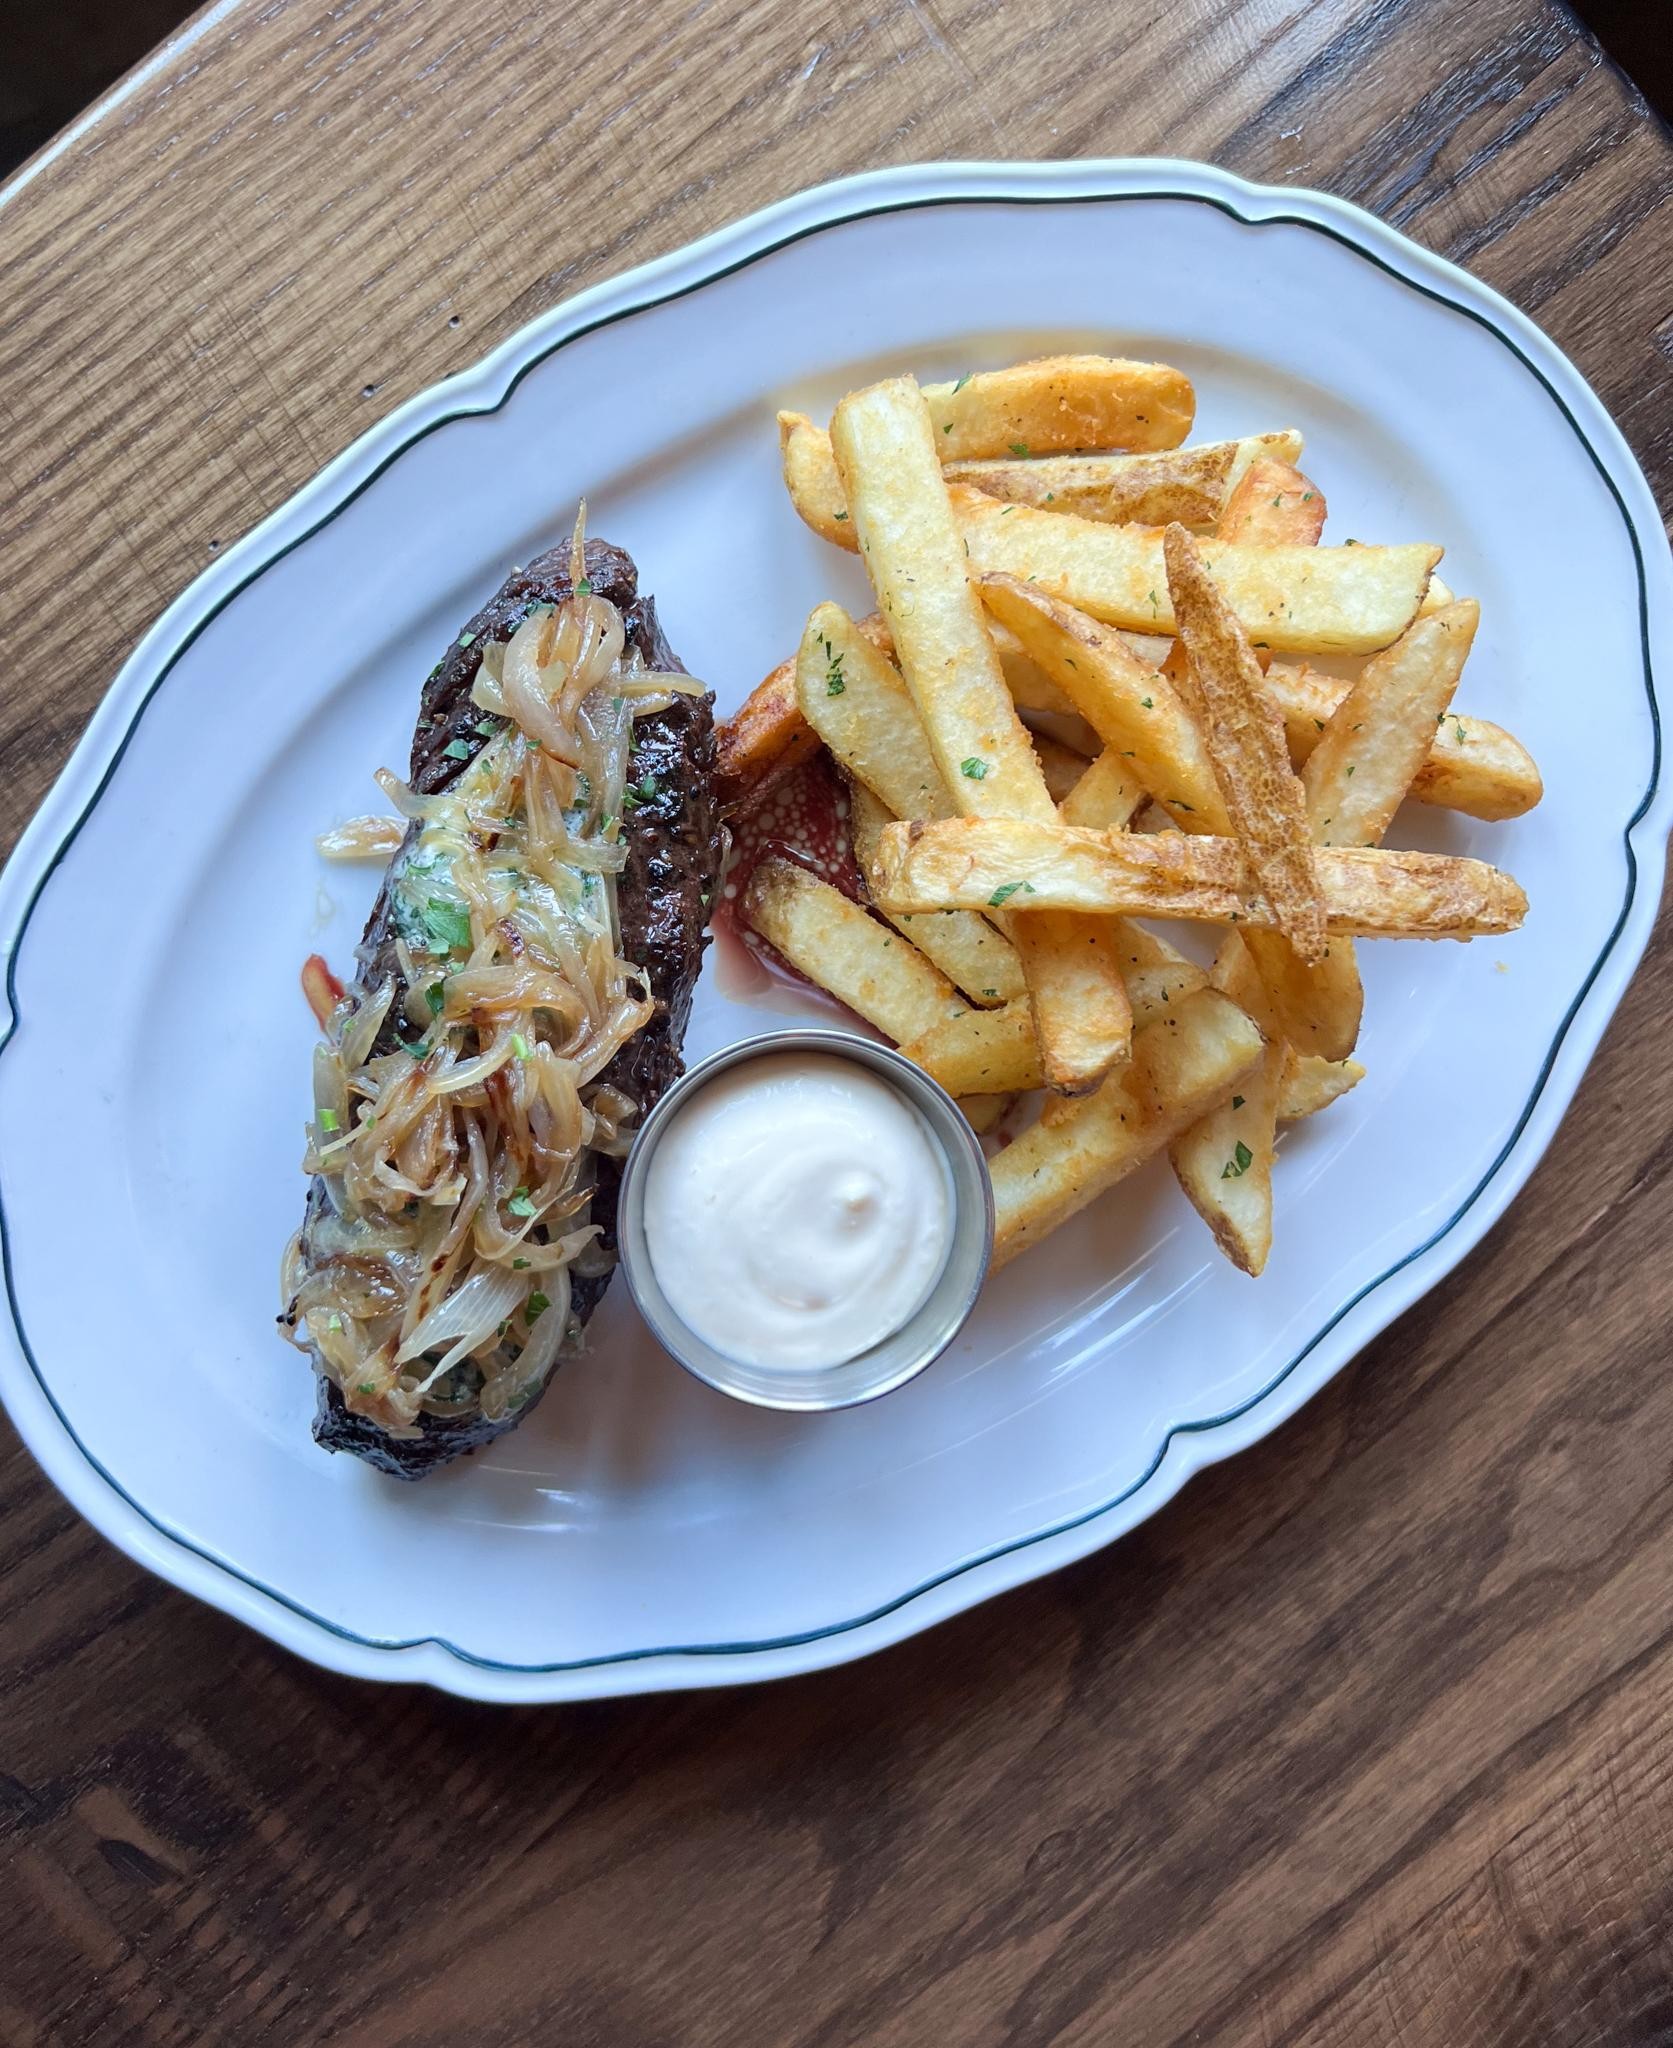 Steak Frites- Only Available Mondays